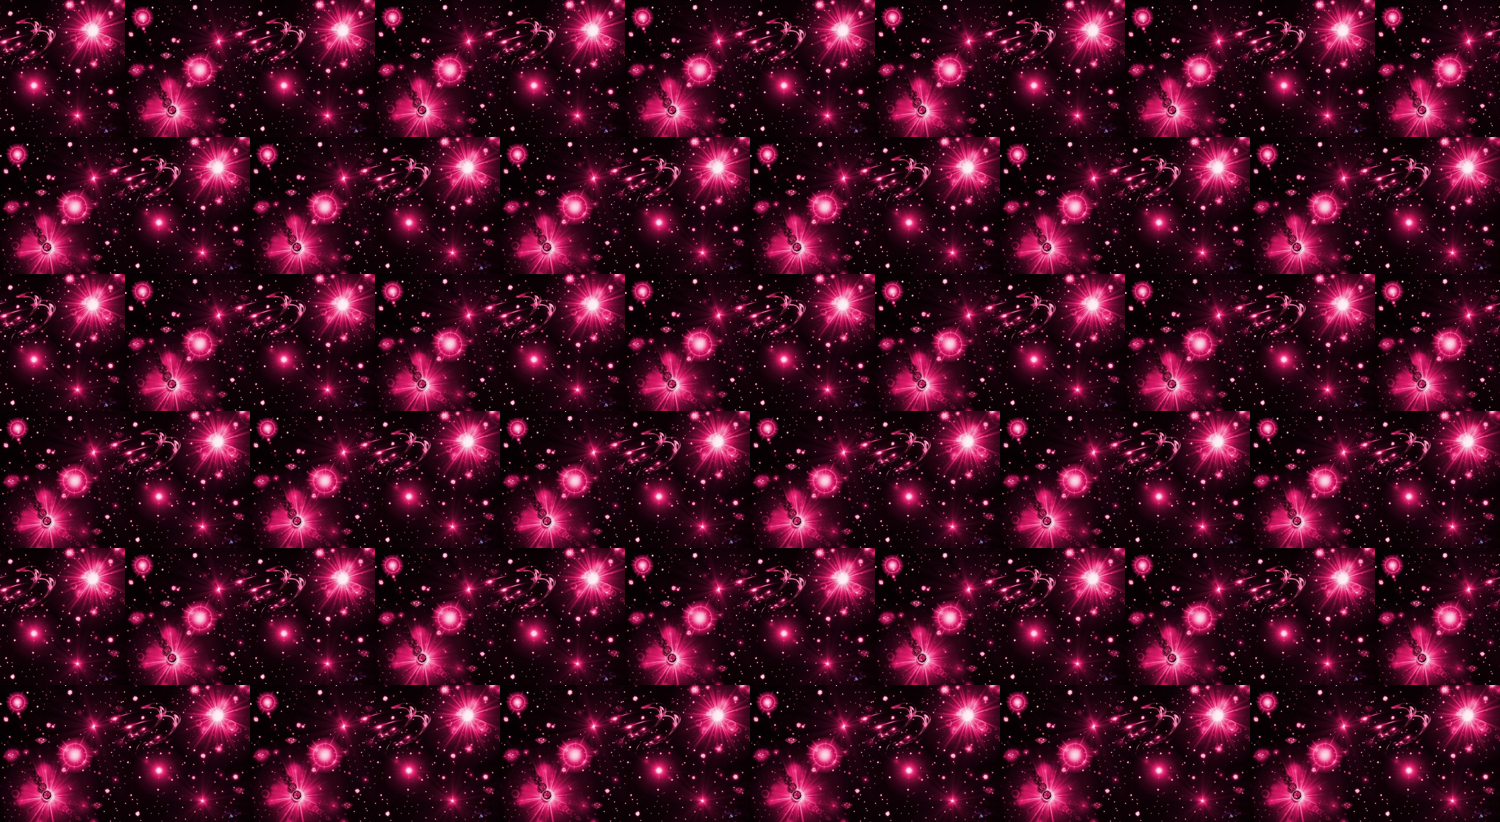 Hot Pink And Black Wallpaper Designs 5 hot pink and black starry